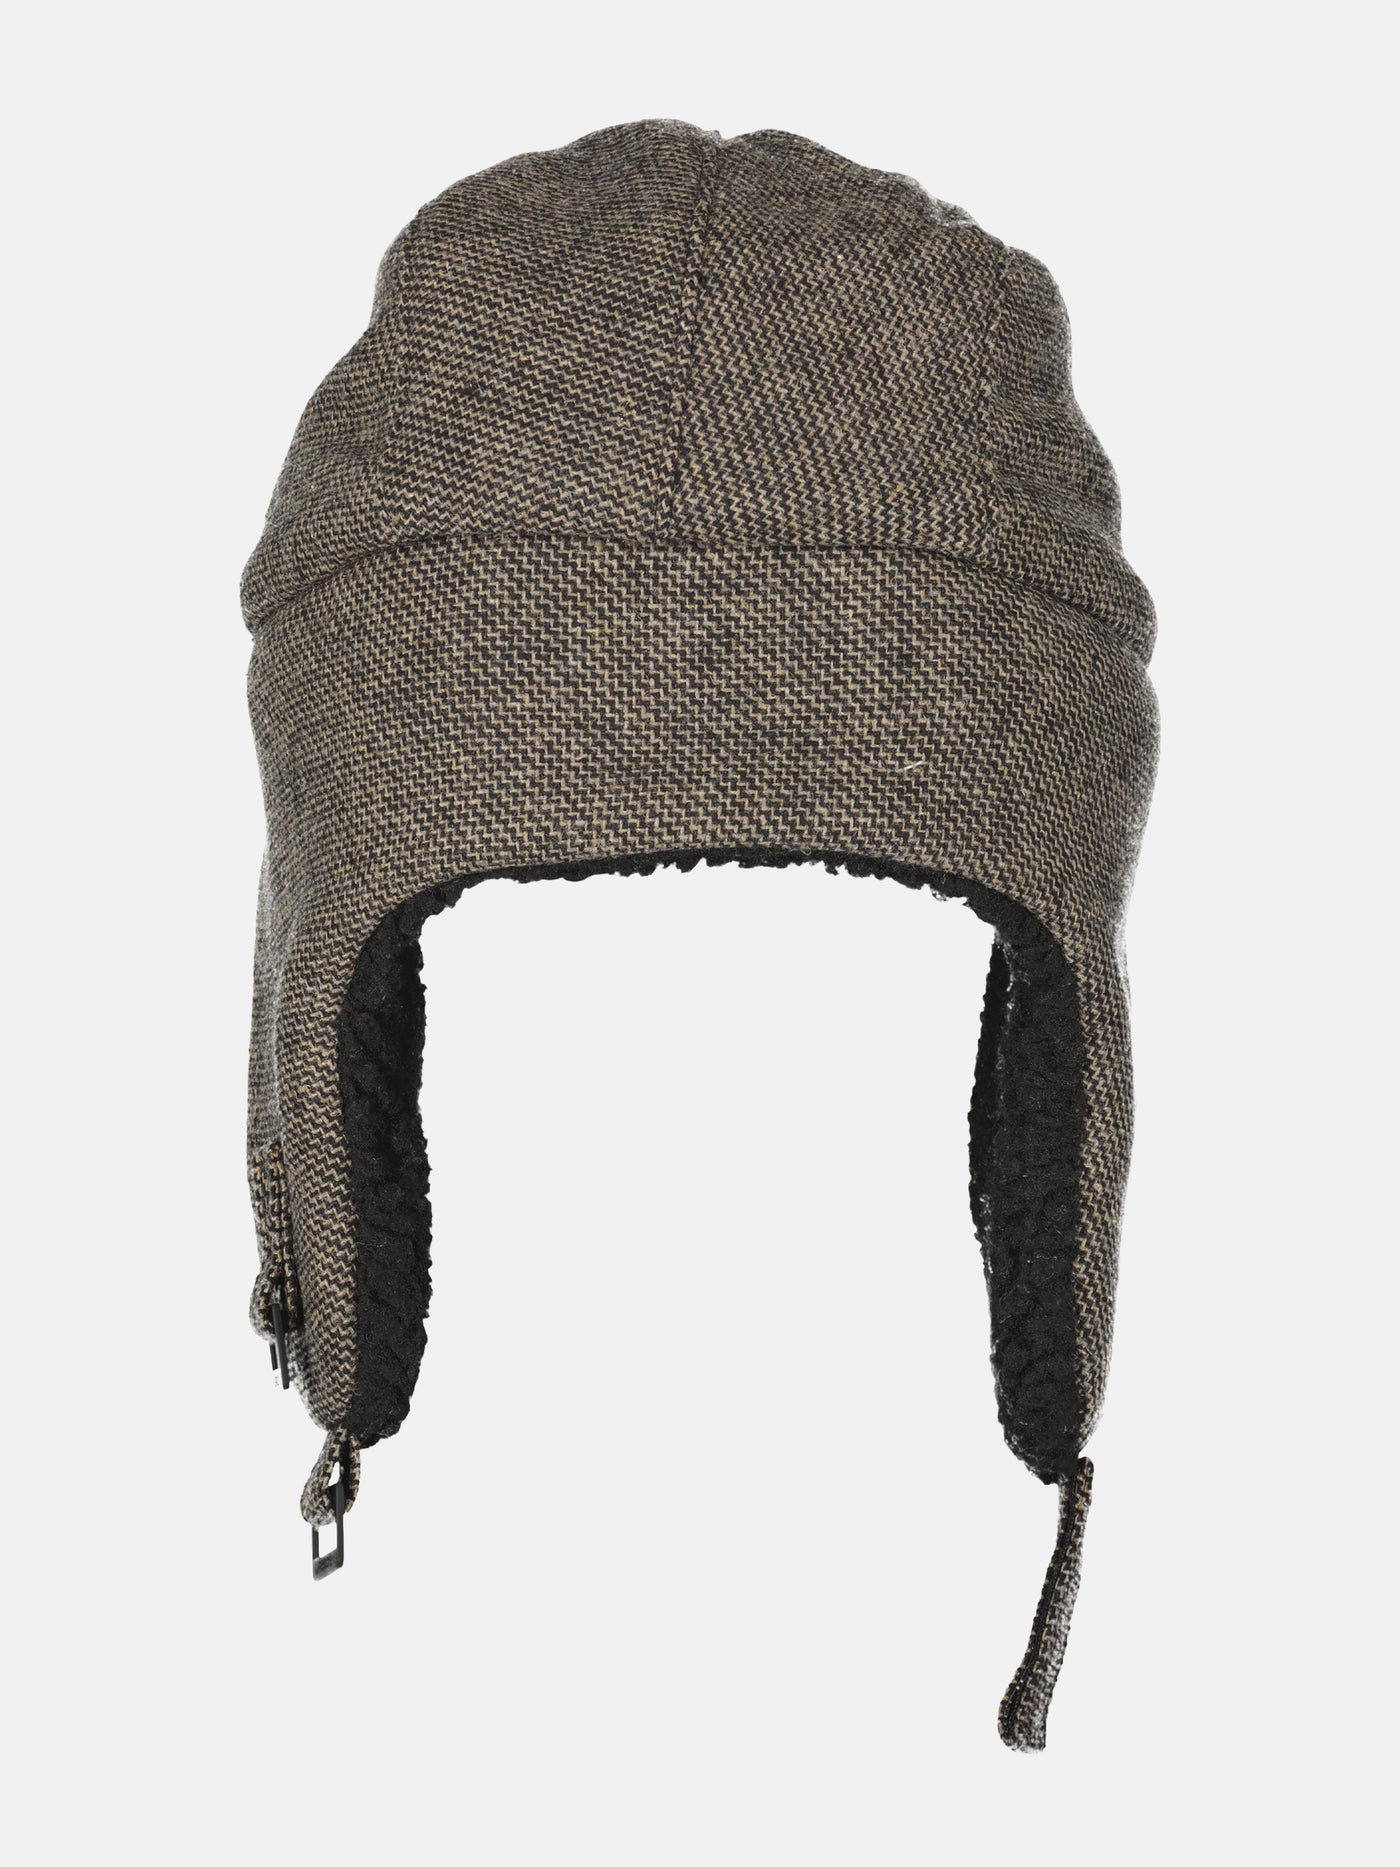 Trapper hat, ZigZag pattern with teddy lining